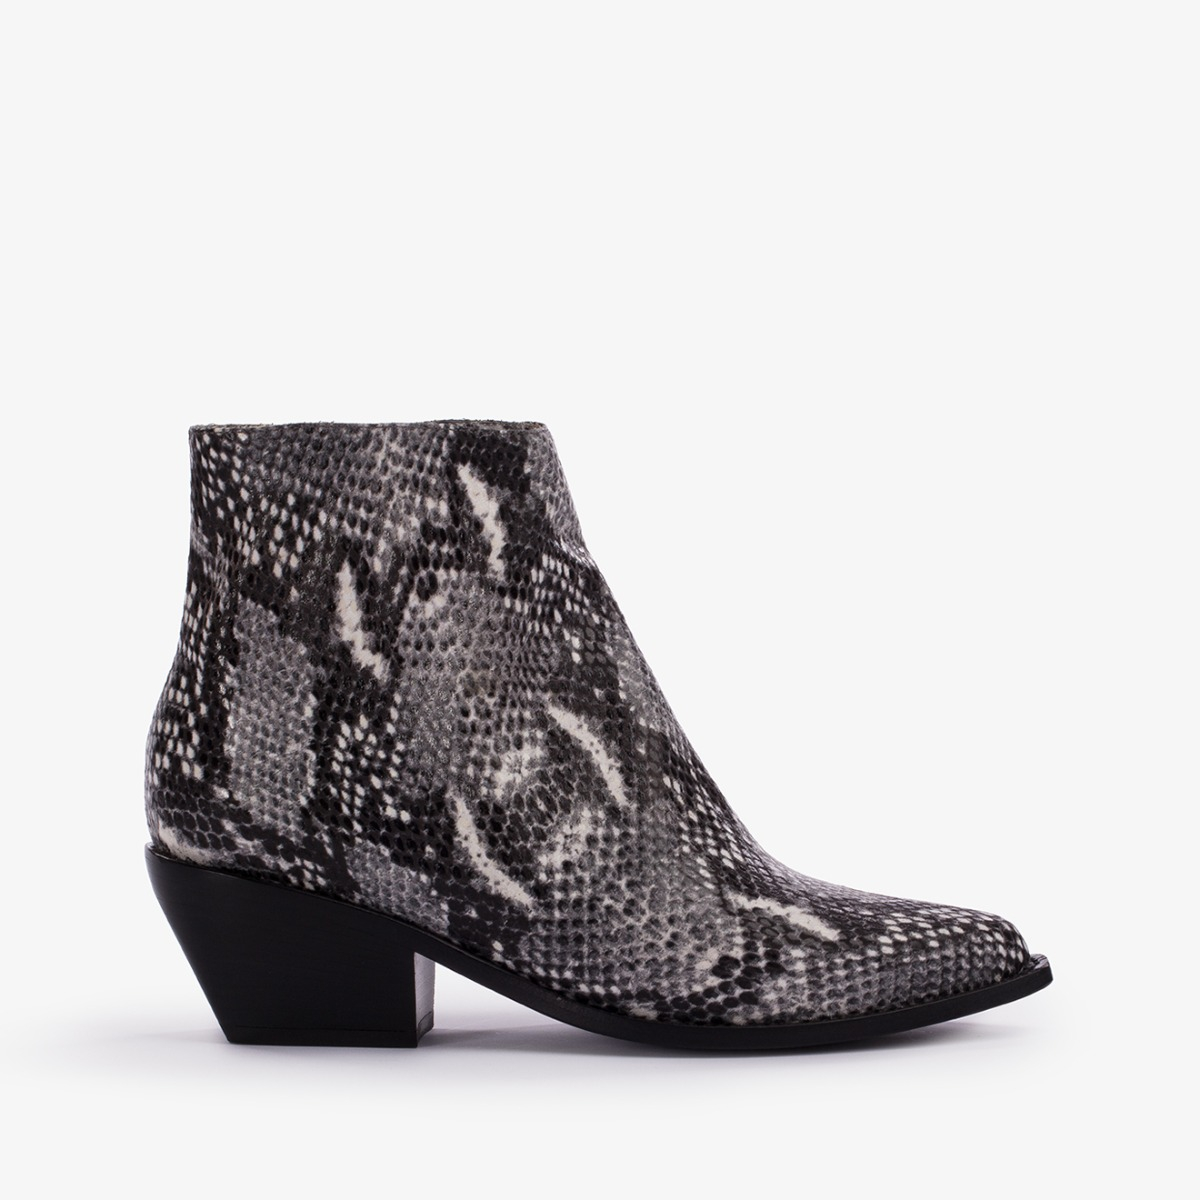 CHRISTINE COWBOY ANKLE BOOT 70 mm - Le Silla official outlet